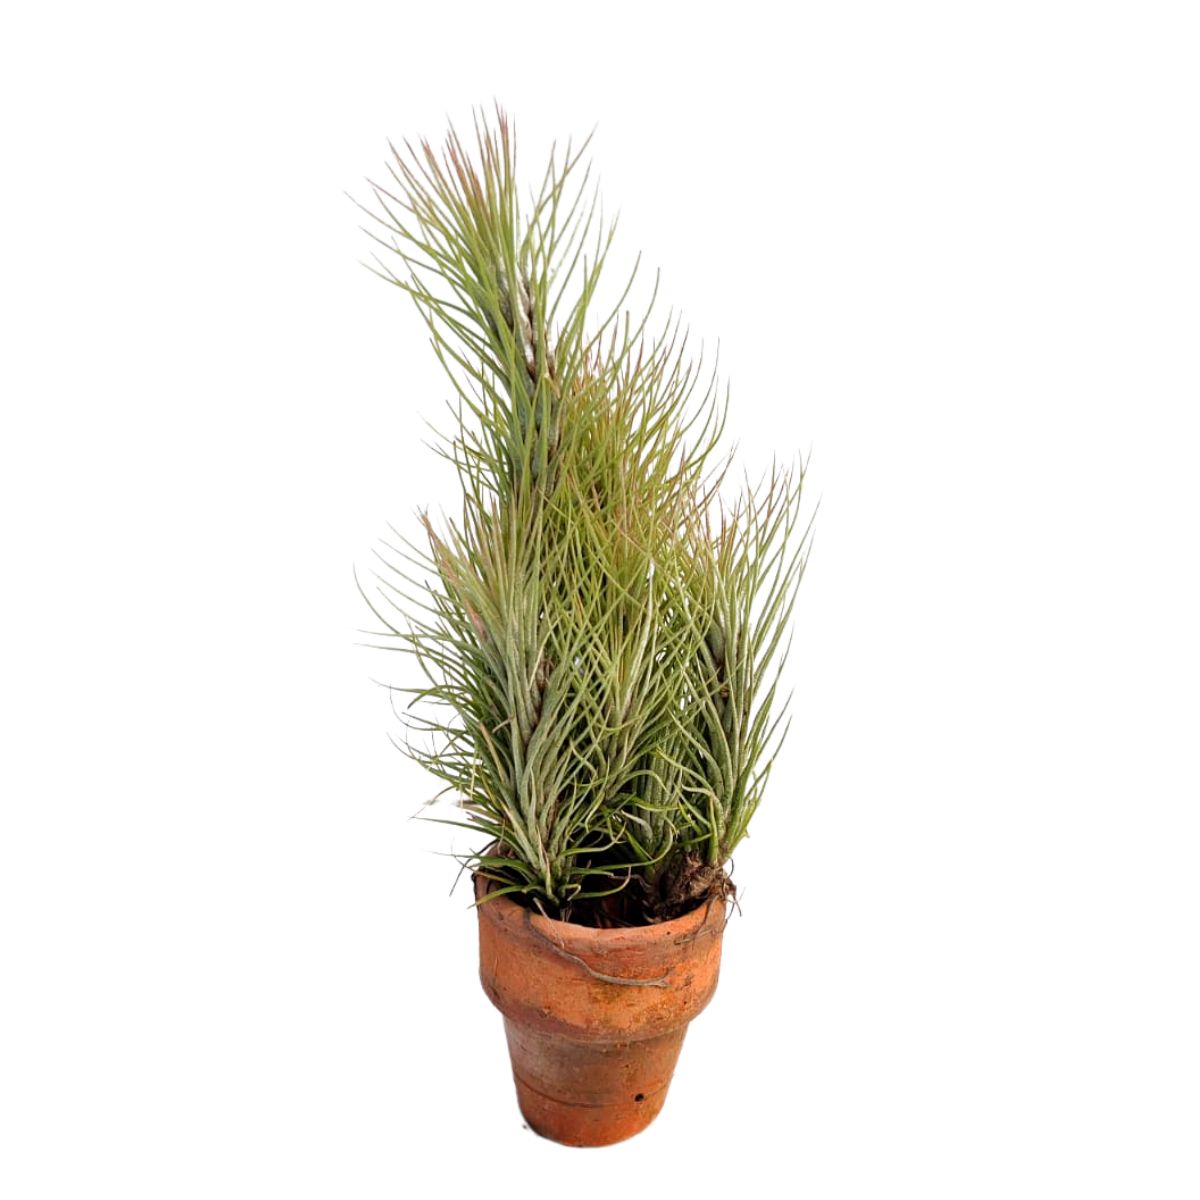 Tillandsia Funckiana Clump air plant collection - Vibrant green leaves in a striking clump formation